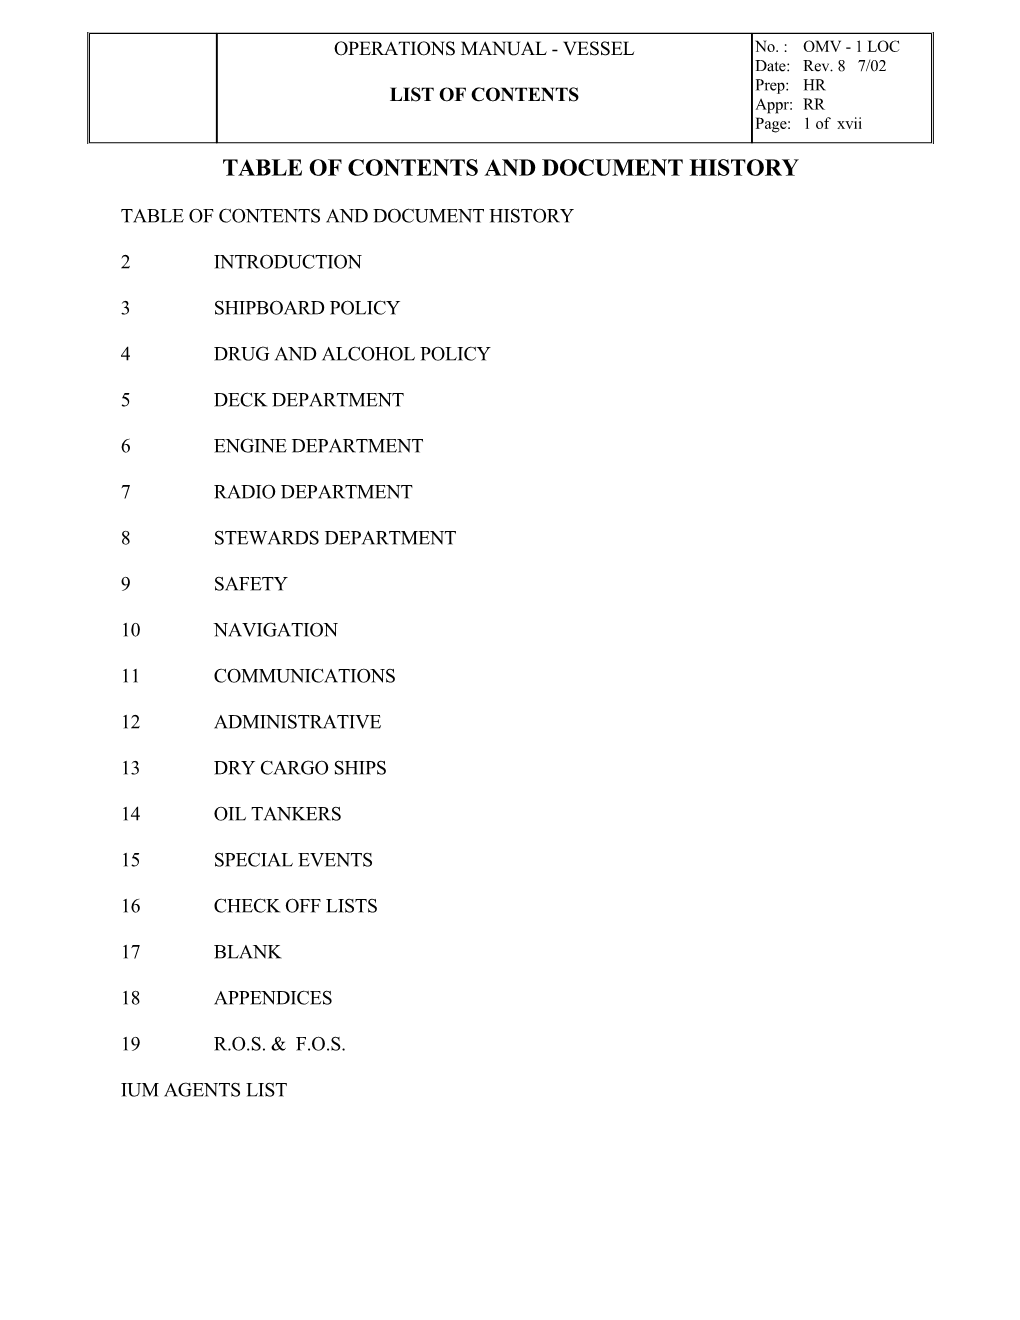 Table of Contents and Document History